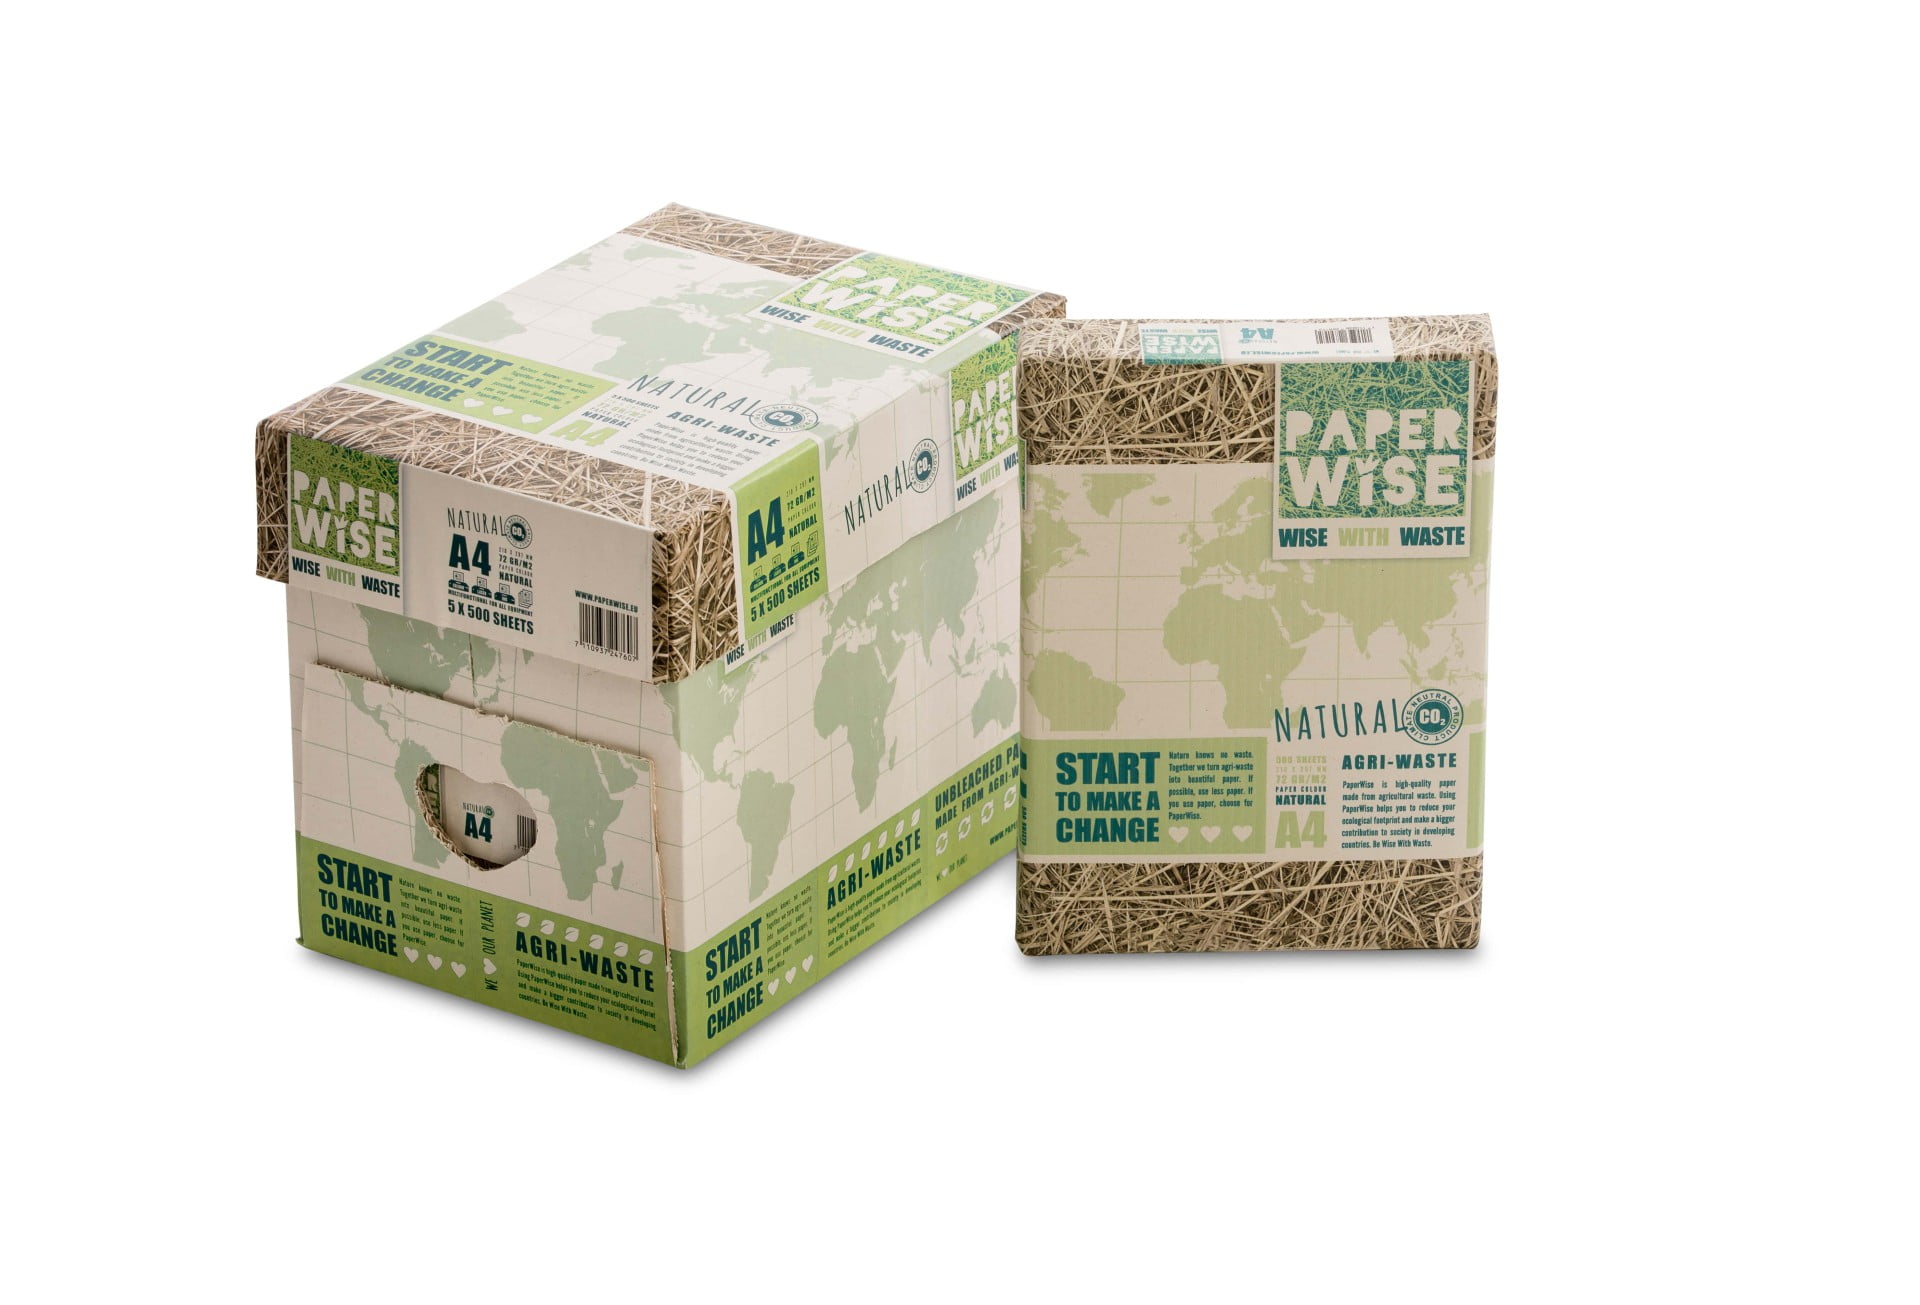 PaperWise Natural CSR copy printing paper A4 72gram wisewithwaste sustainable eco friendly paper office